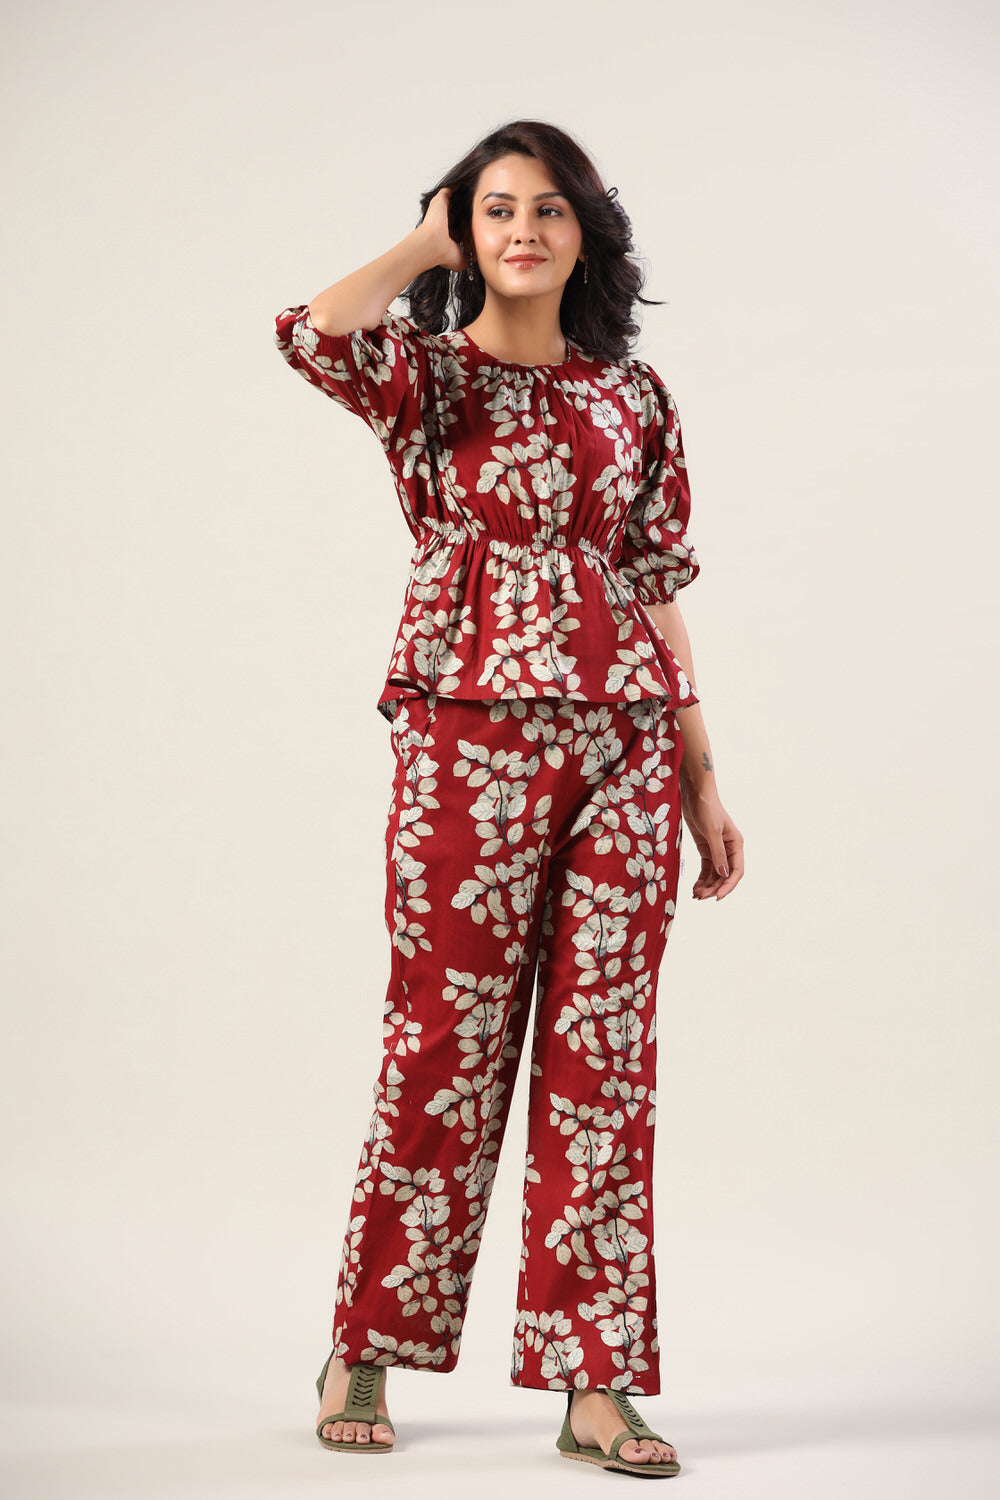 Autumn Leaves on Red Co-ord Set